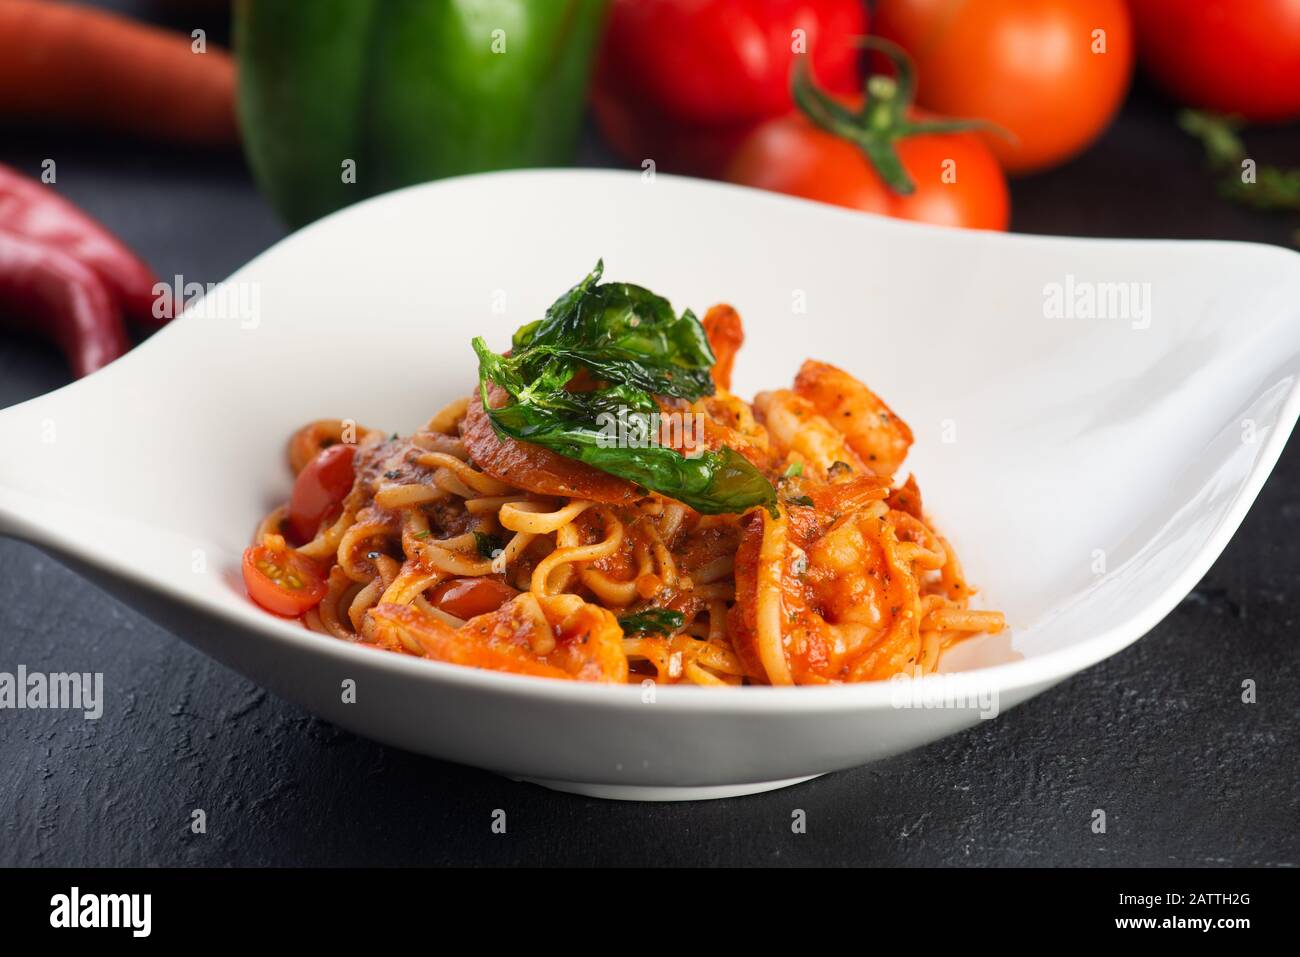 Pasta with meat, tomato sauce and vegetables Stock Photo